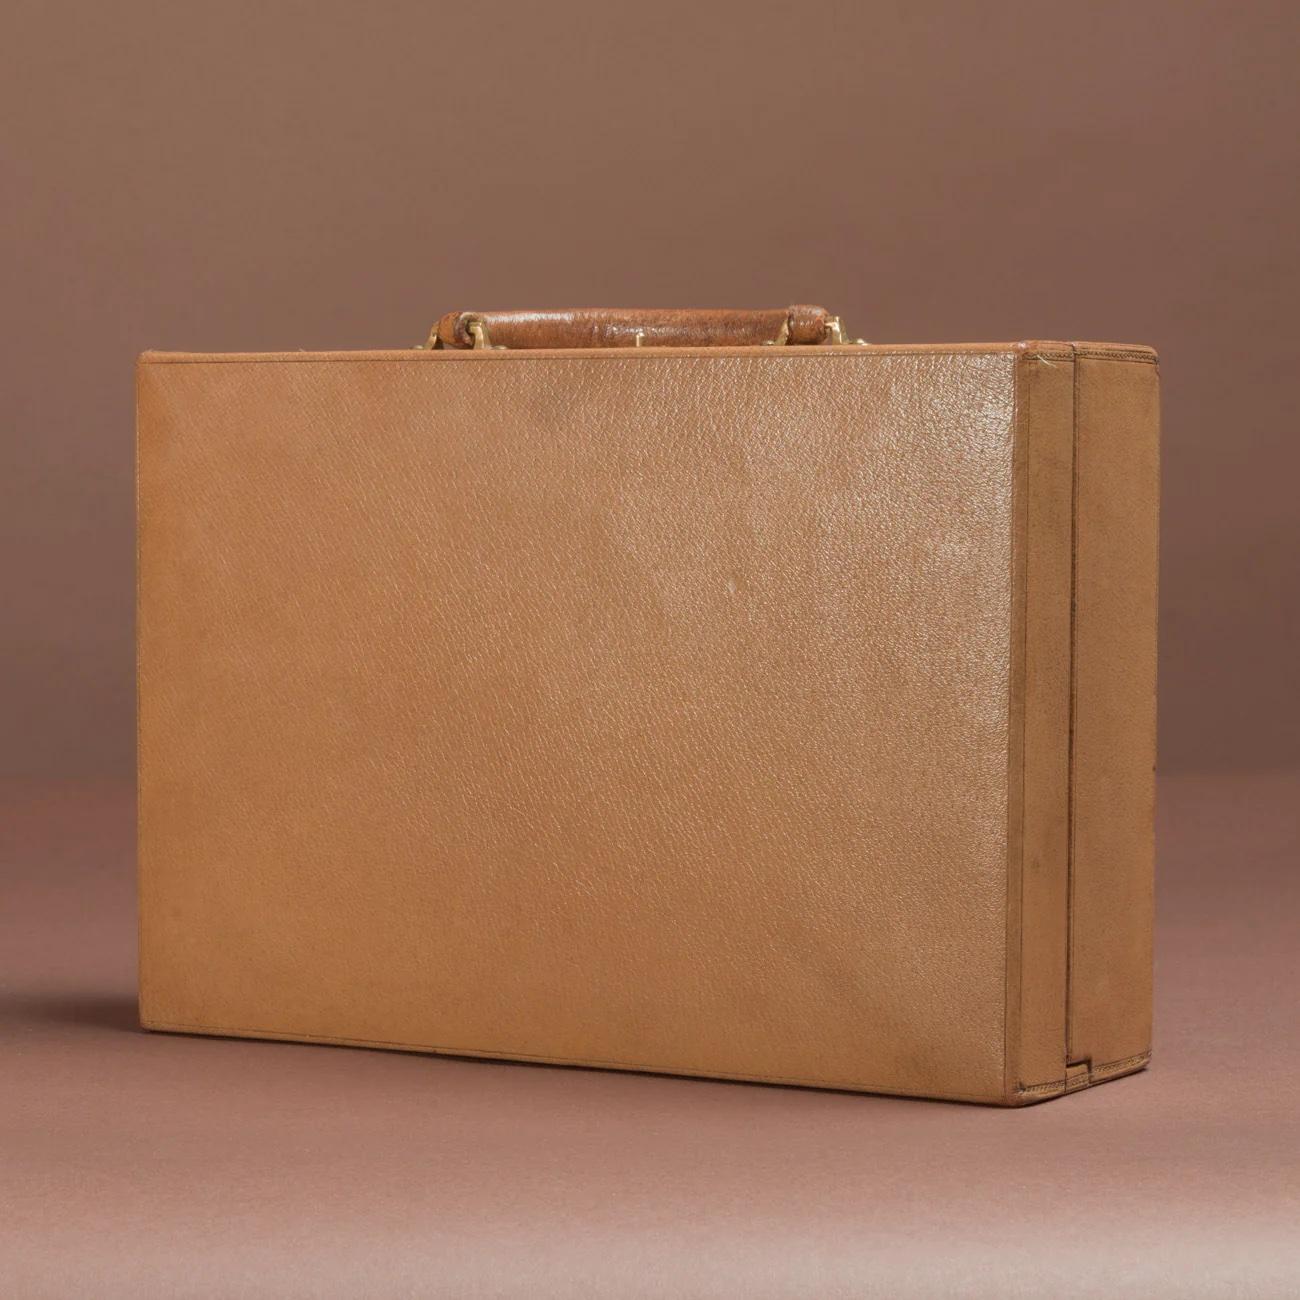 A rare and beautiful Louis Vuitton pigskin leather jewel case with suede lining and canvas cover meaning that the case is in exceptionally good condition. Includes original key.

Circa 1920.

Dimensions of case: 30.25 cm/11⅞ wide x 21 cm/8¼ deep x